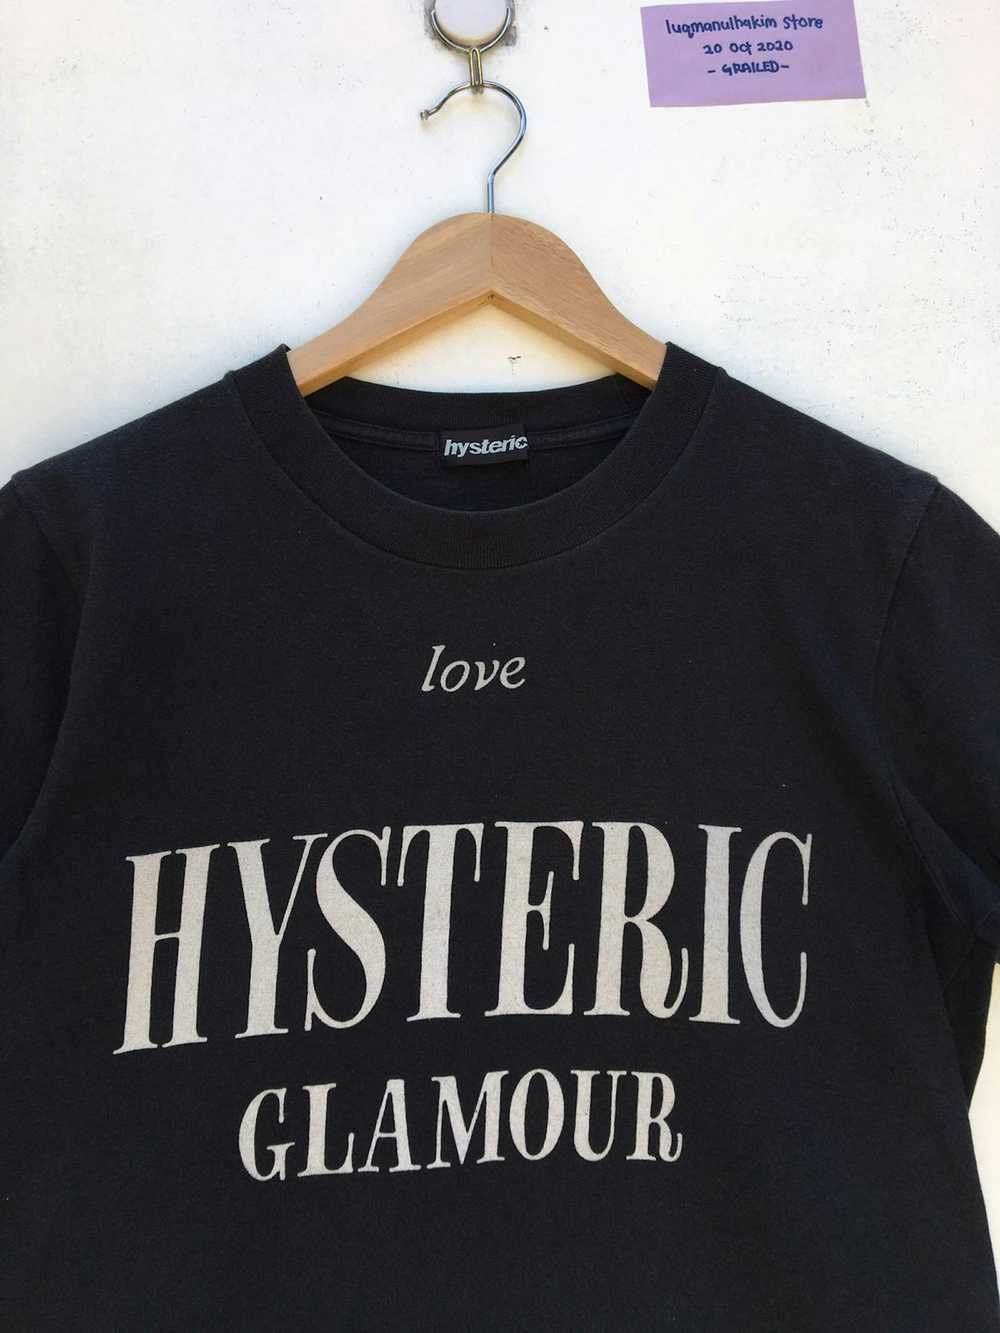 Hysteric Glamour × Vintage Vintage 90s Hysteric g… - image 4